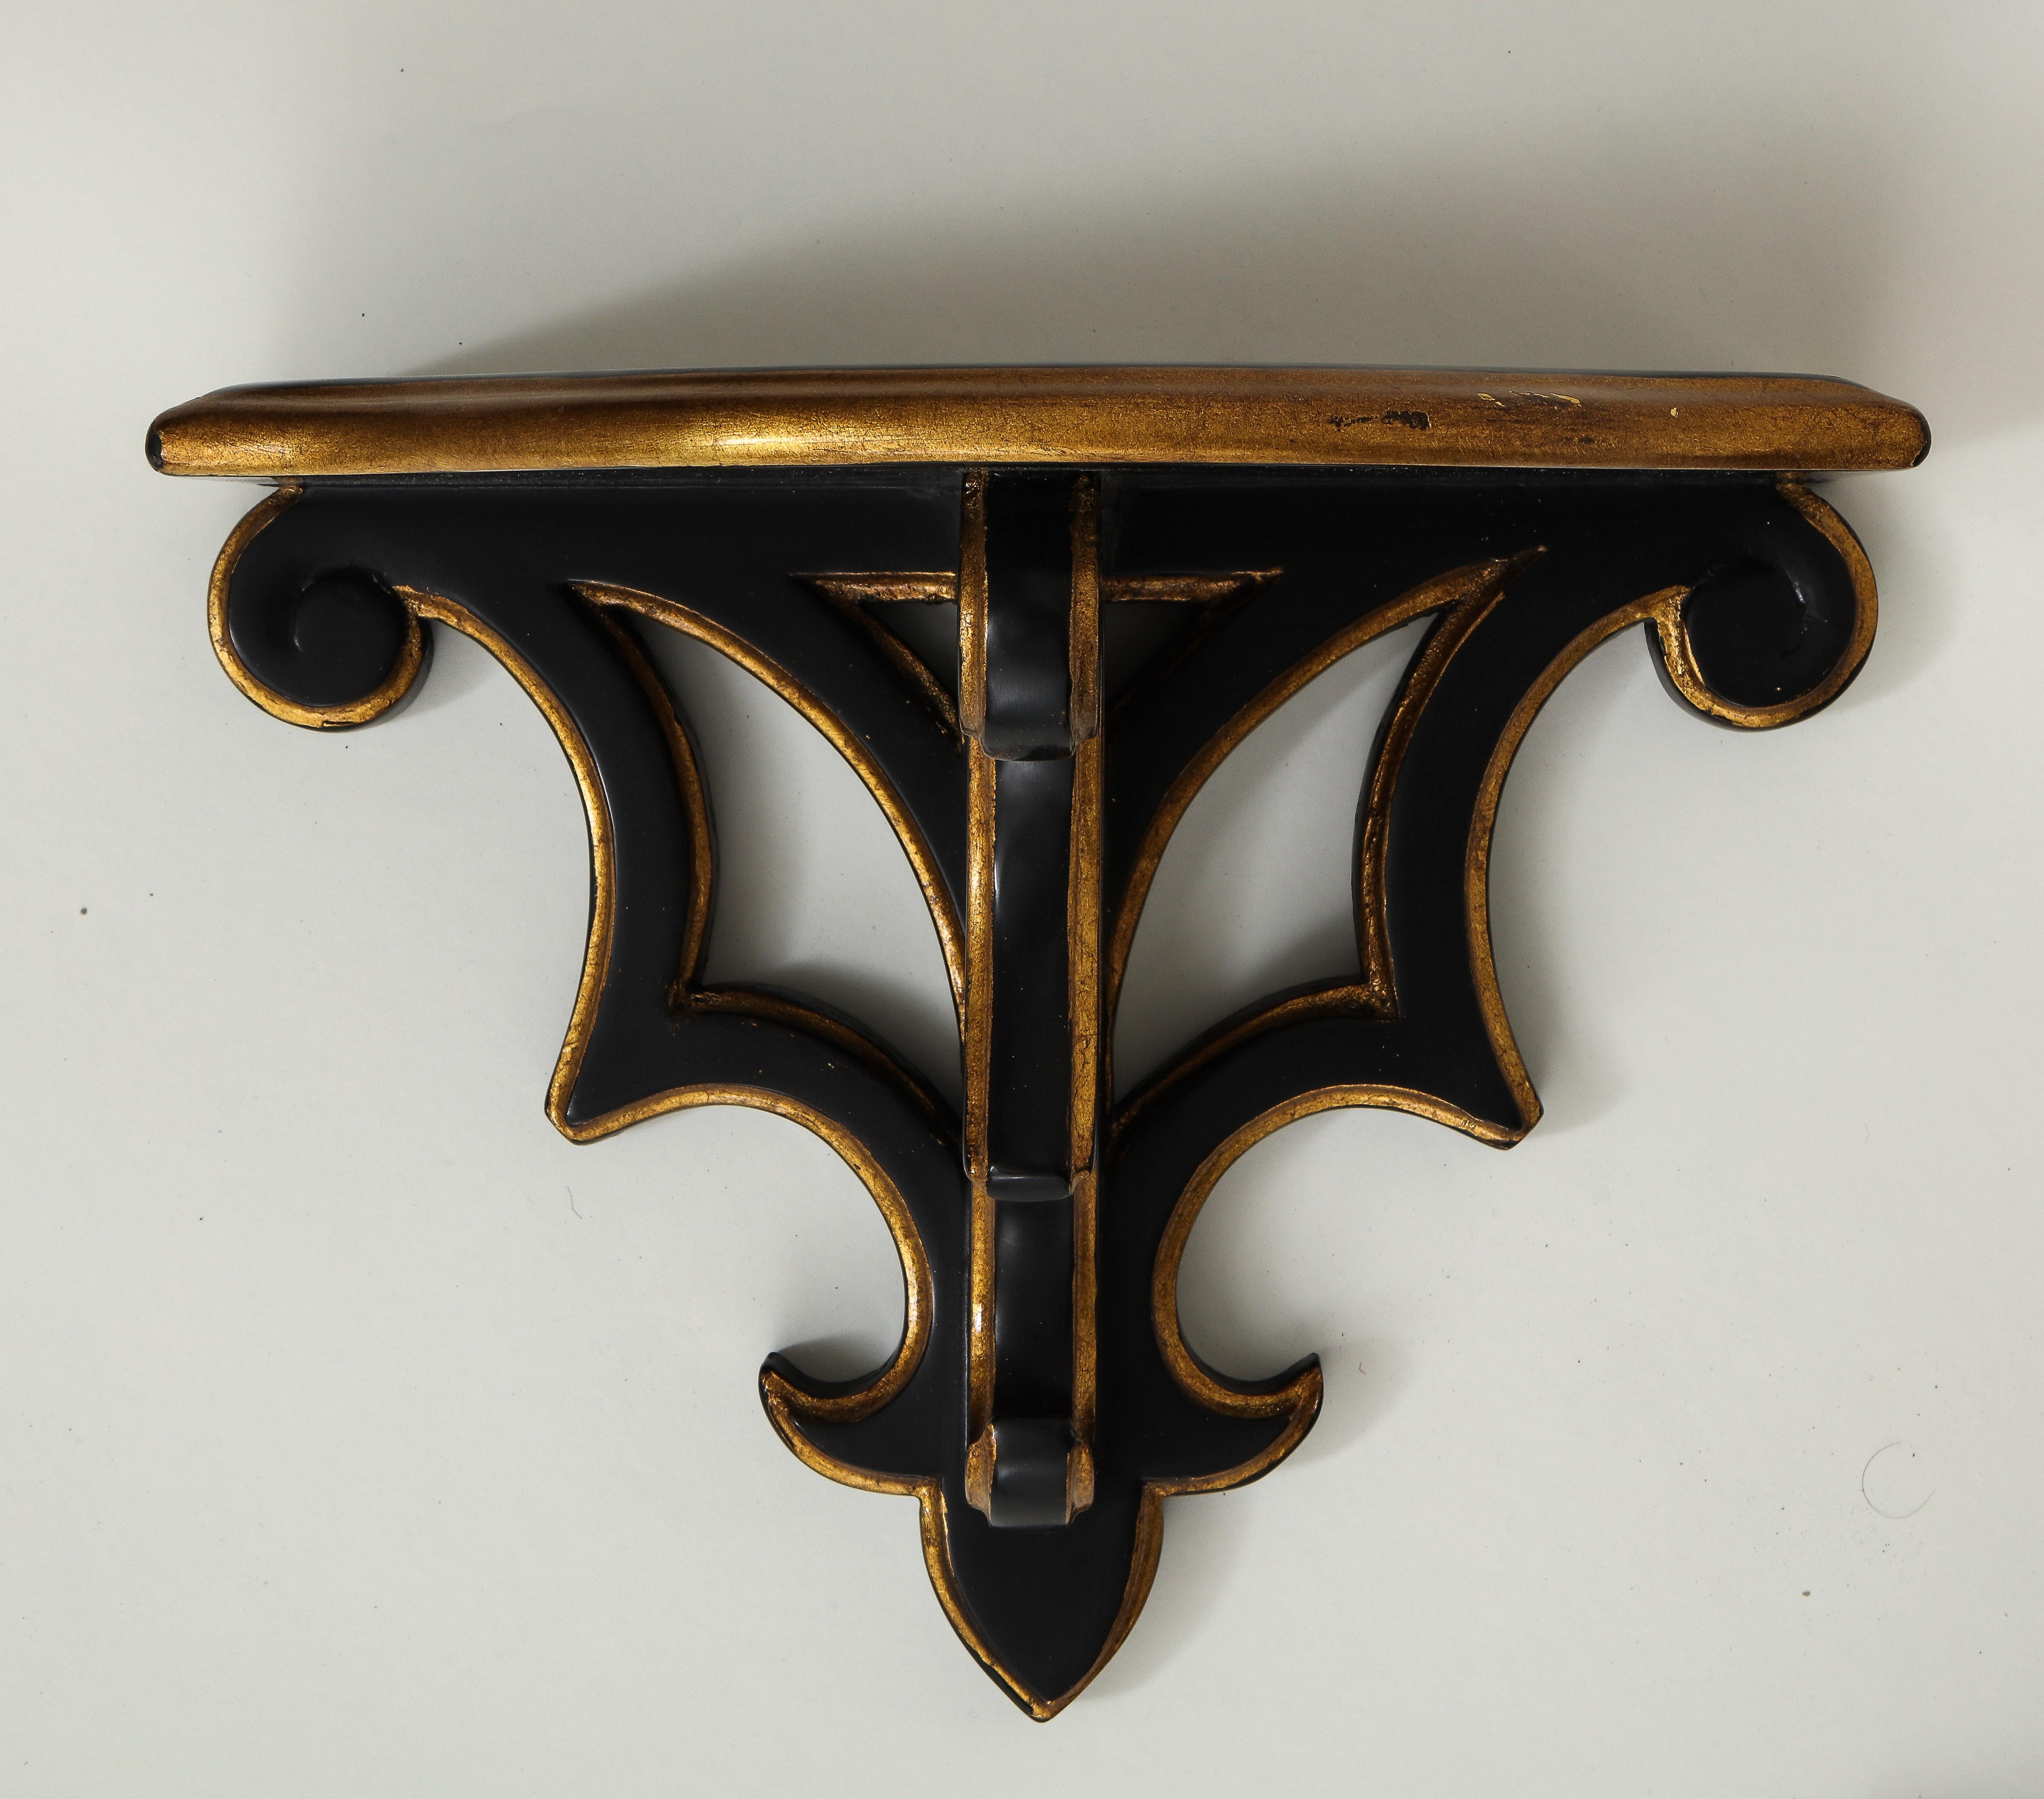 Baroque Revival Pair of Black and Gilt Wall Brackets